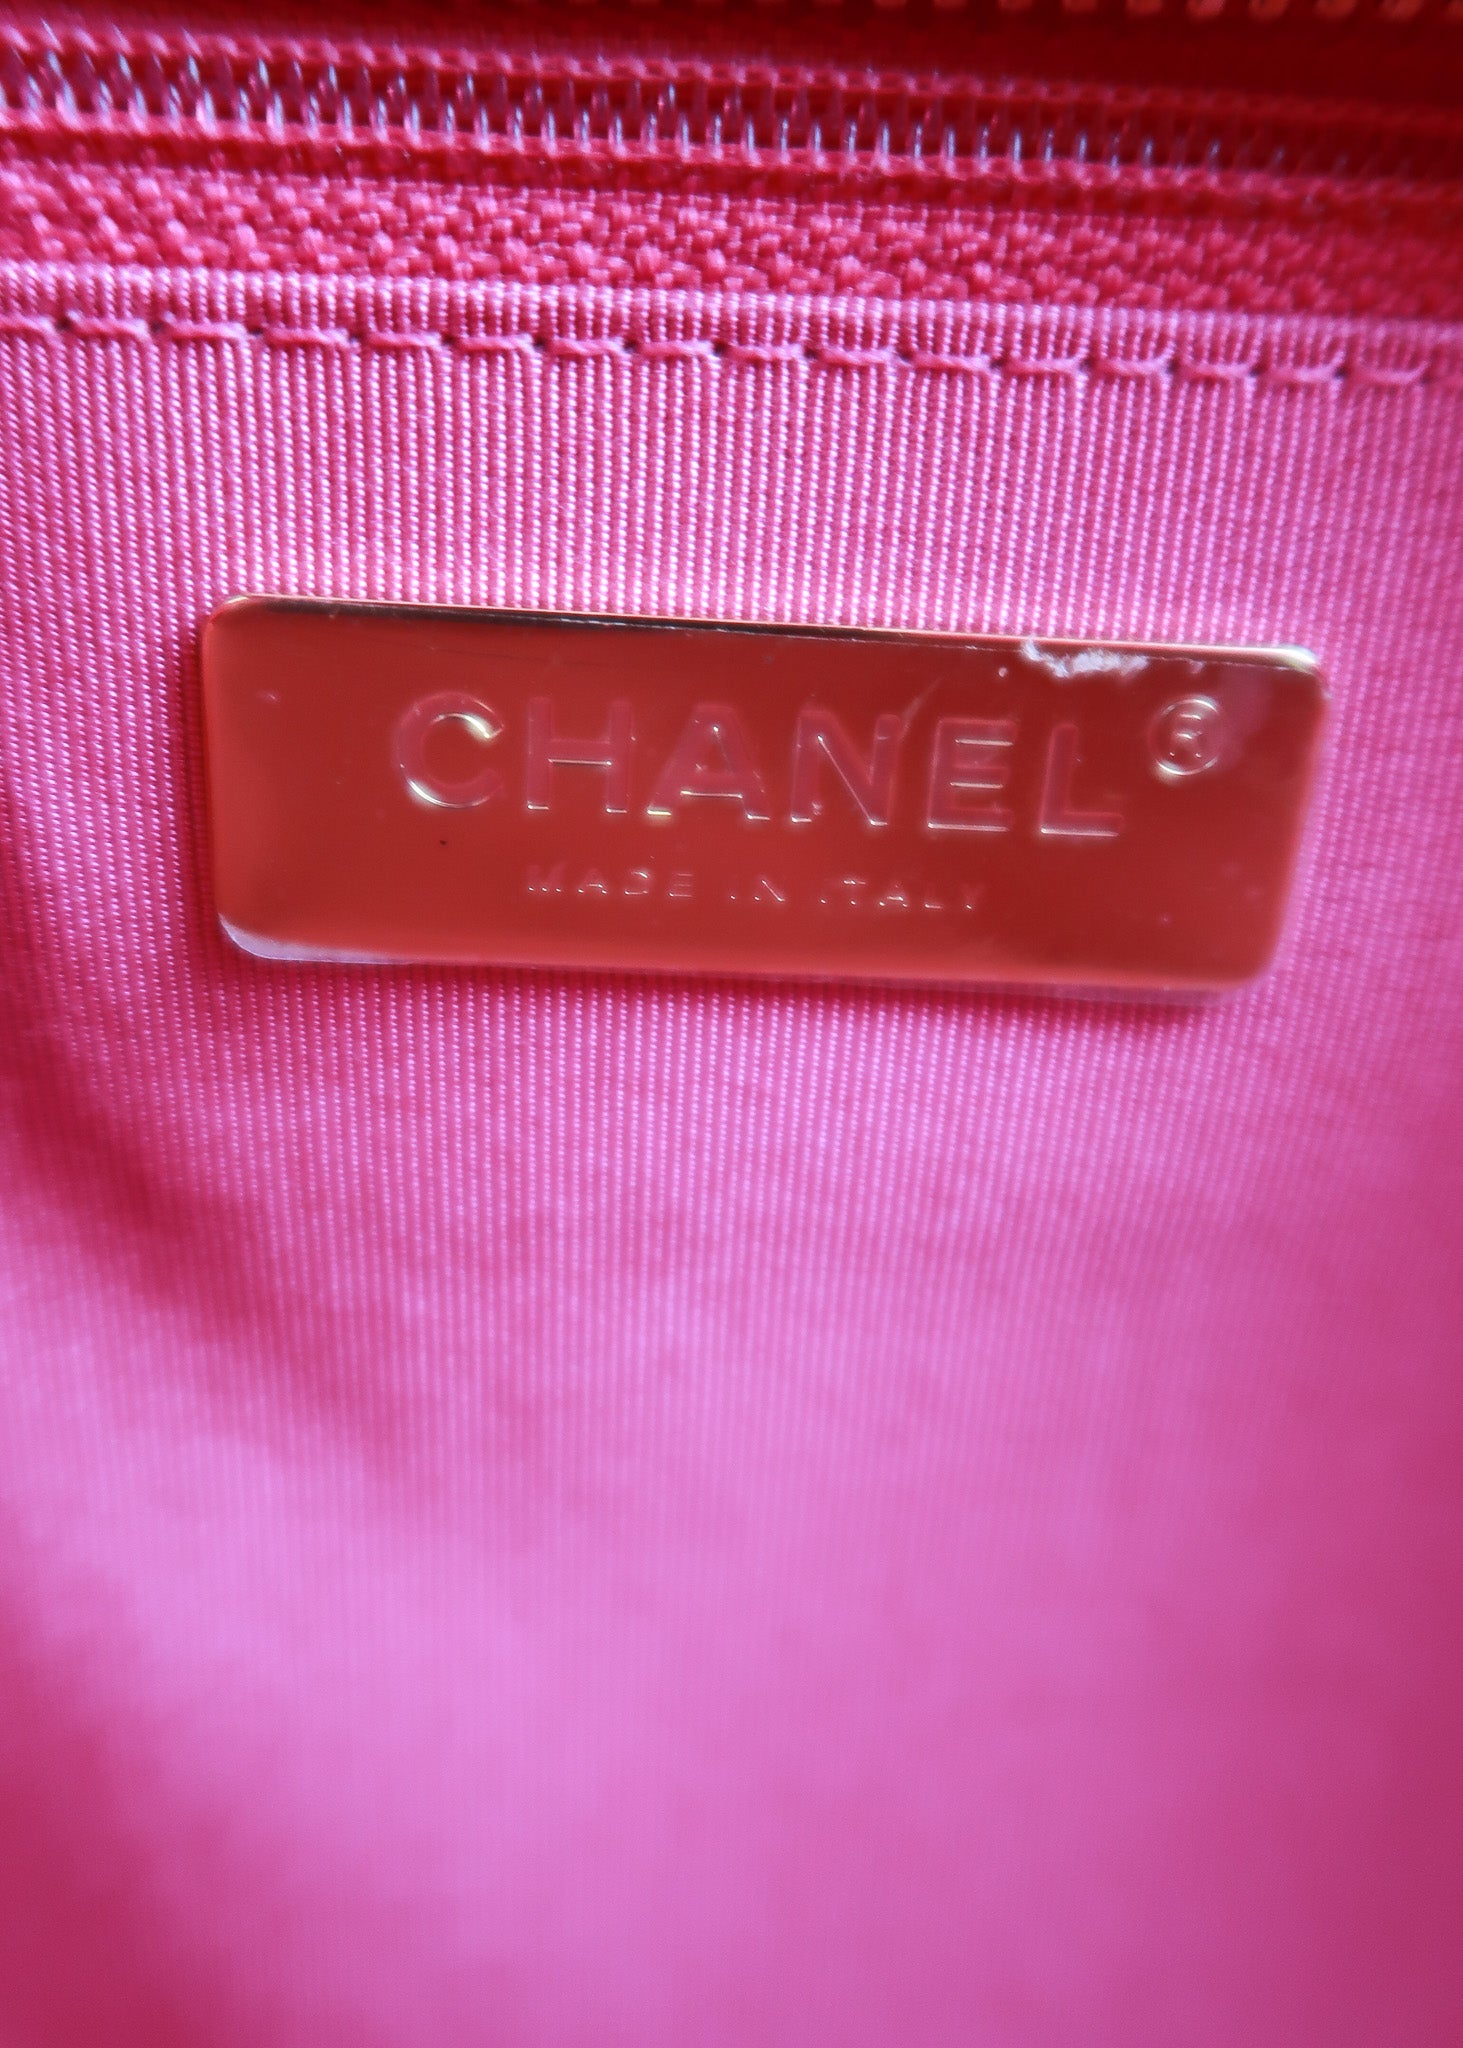 Chanel Giant Logo Shopping Bag Quilted Tweed Large Pink – DAC